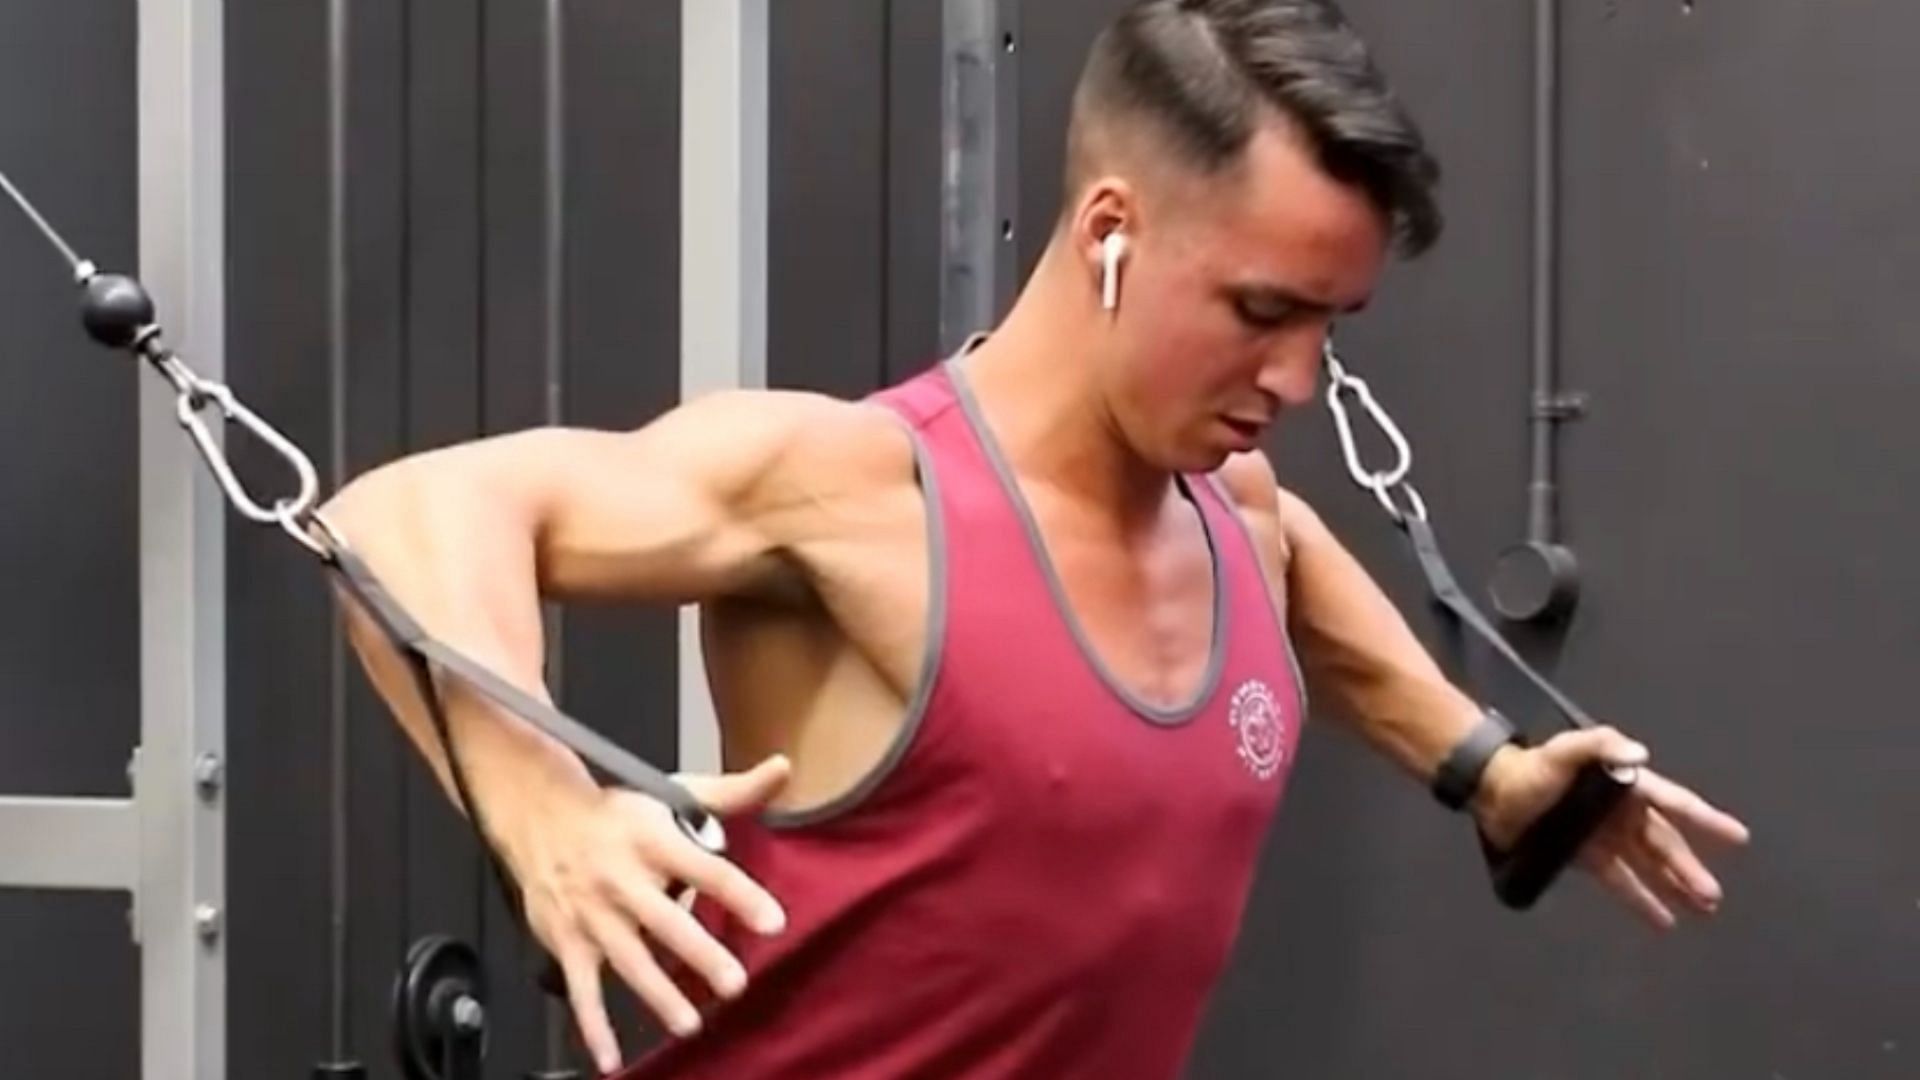 Cable lateral raise engages the trapezius and hamstrings. (Photo via Instagram/fraserwilsonfit)